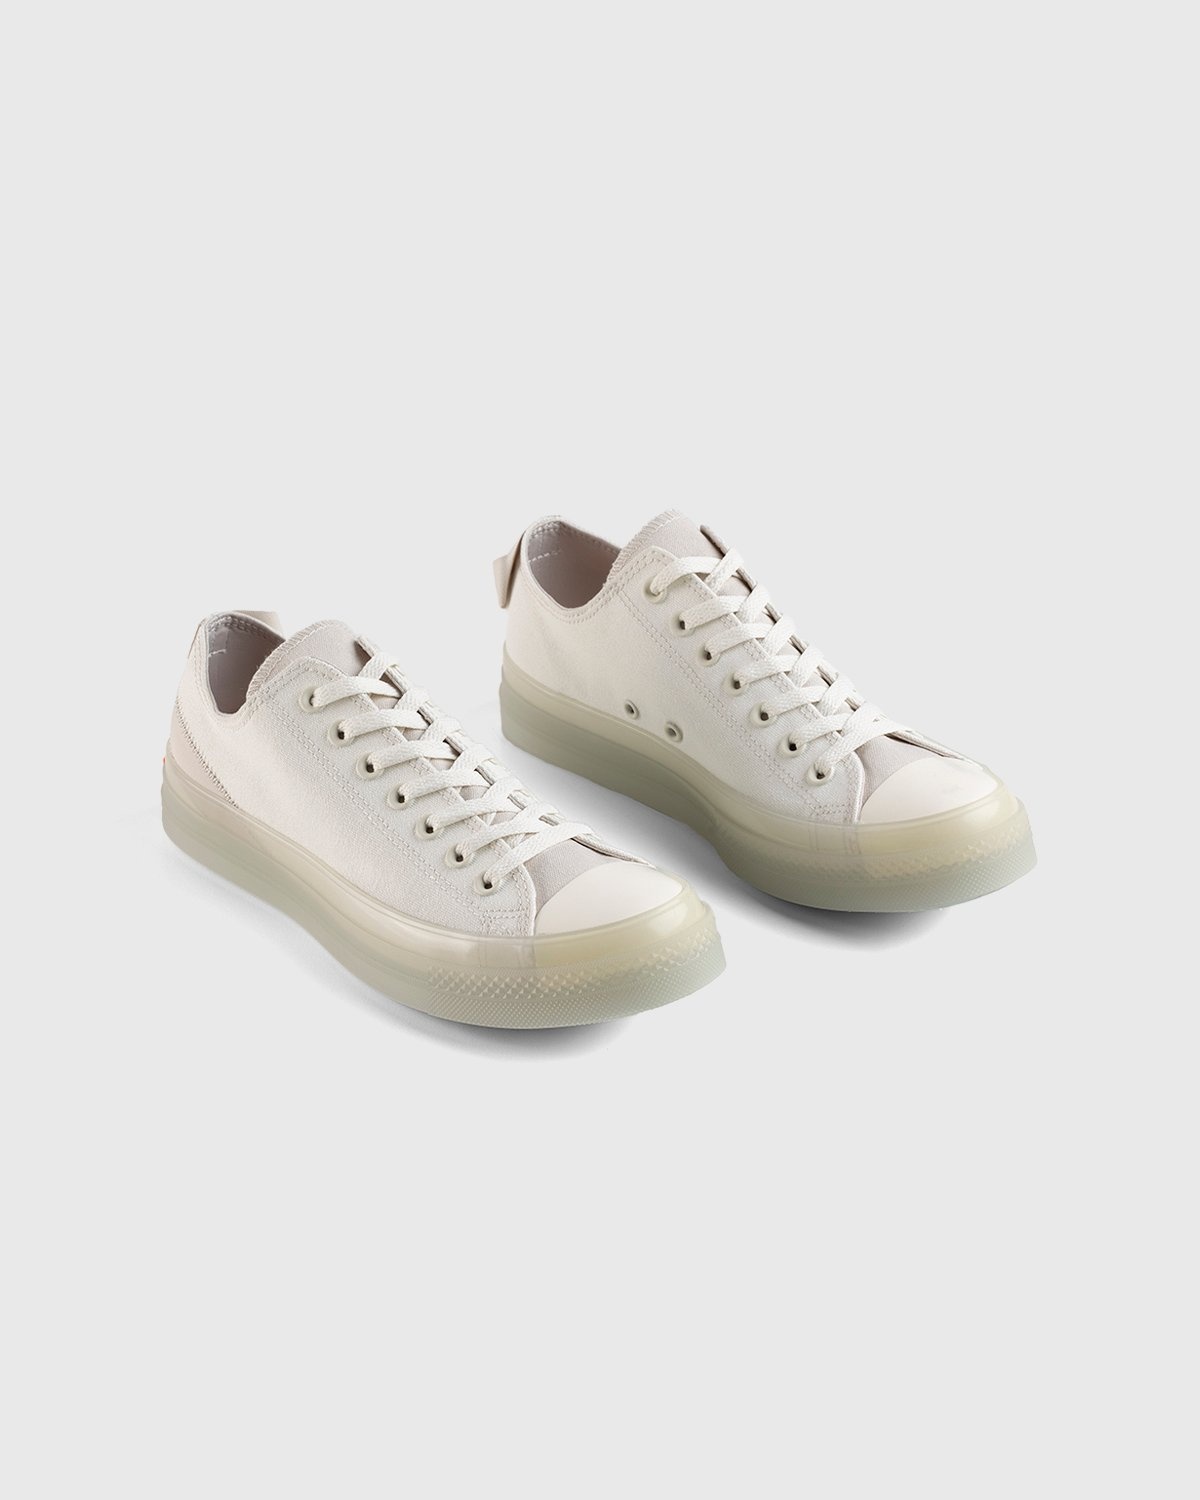 Converse – Chuck Taylor All Star CX Egret/Desert Sand - Sneakers - Grey - Image 7